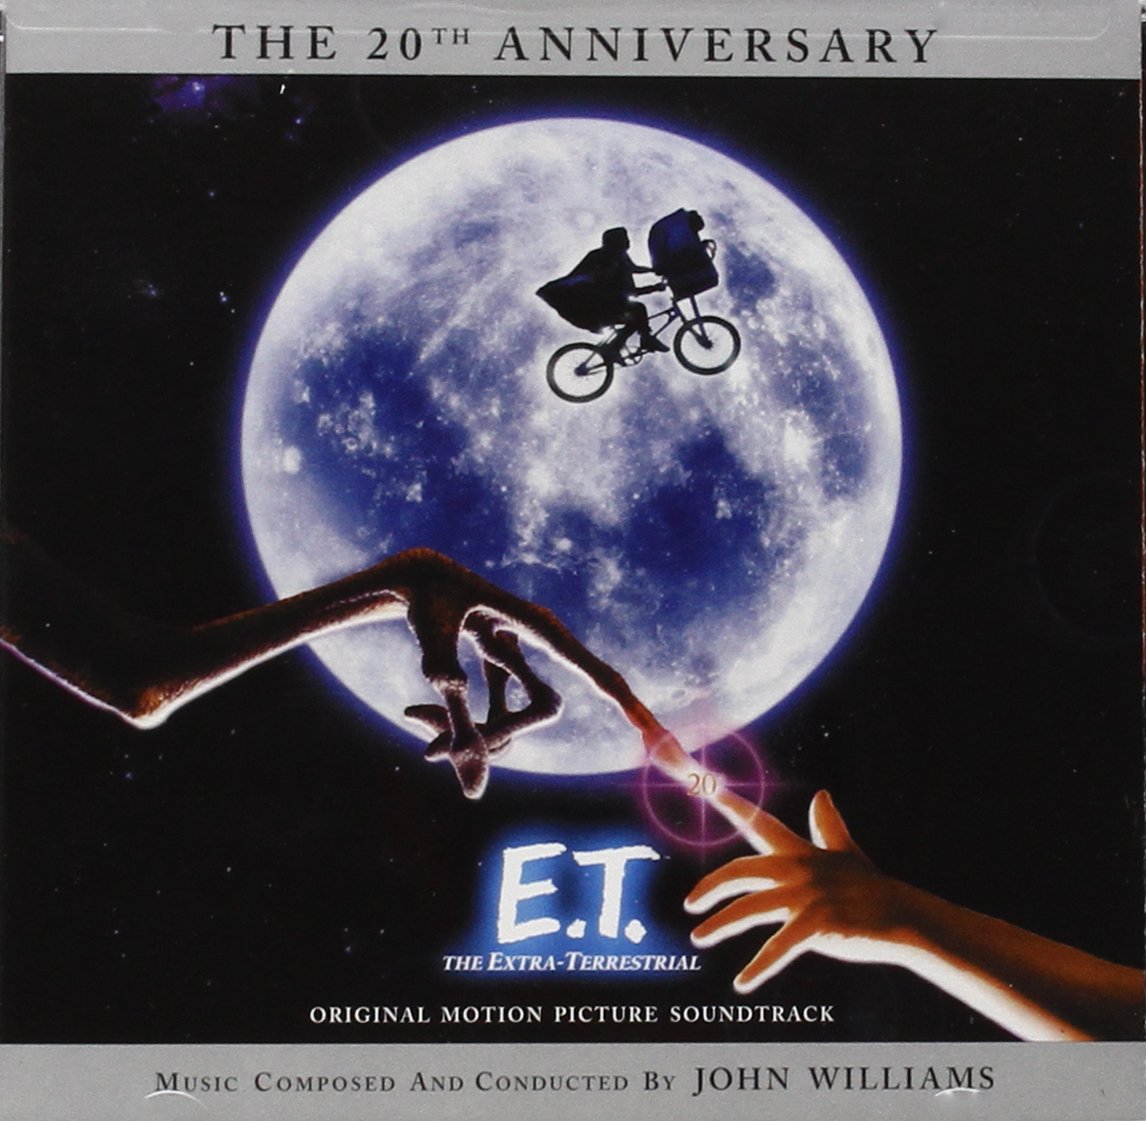 E.T. The Extra-Terrestrial - music by John Williams